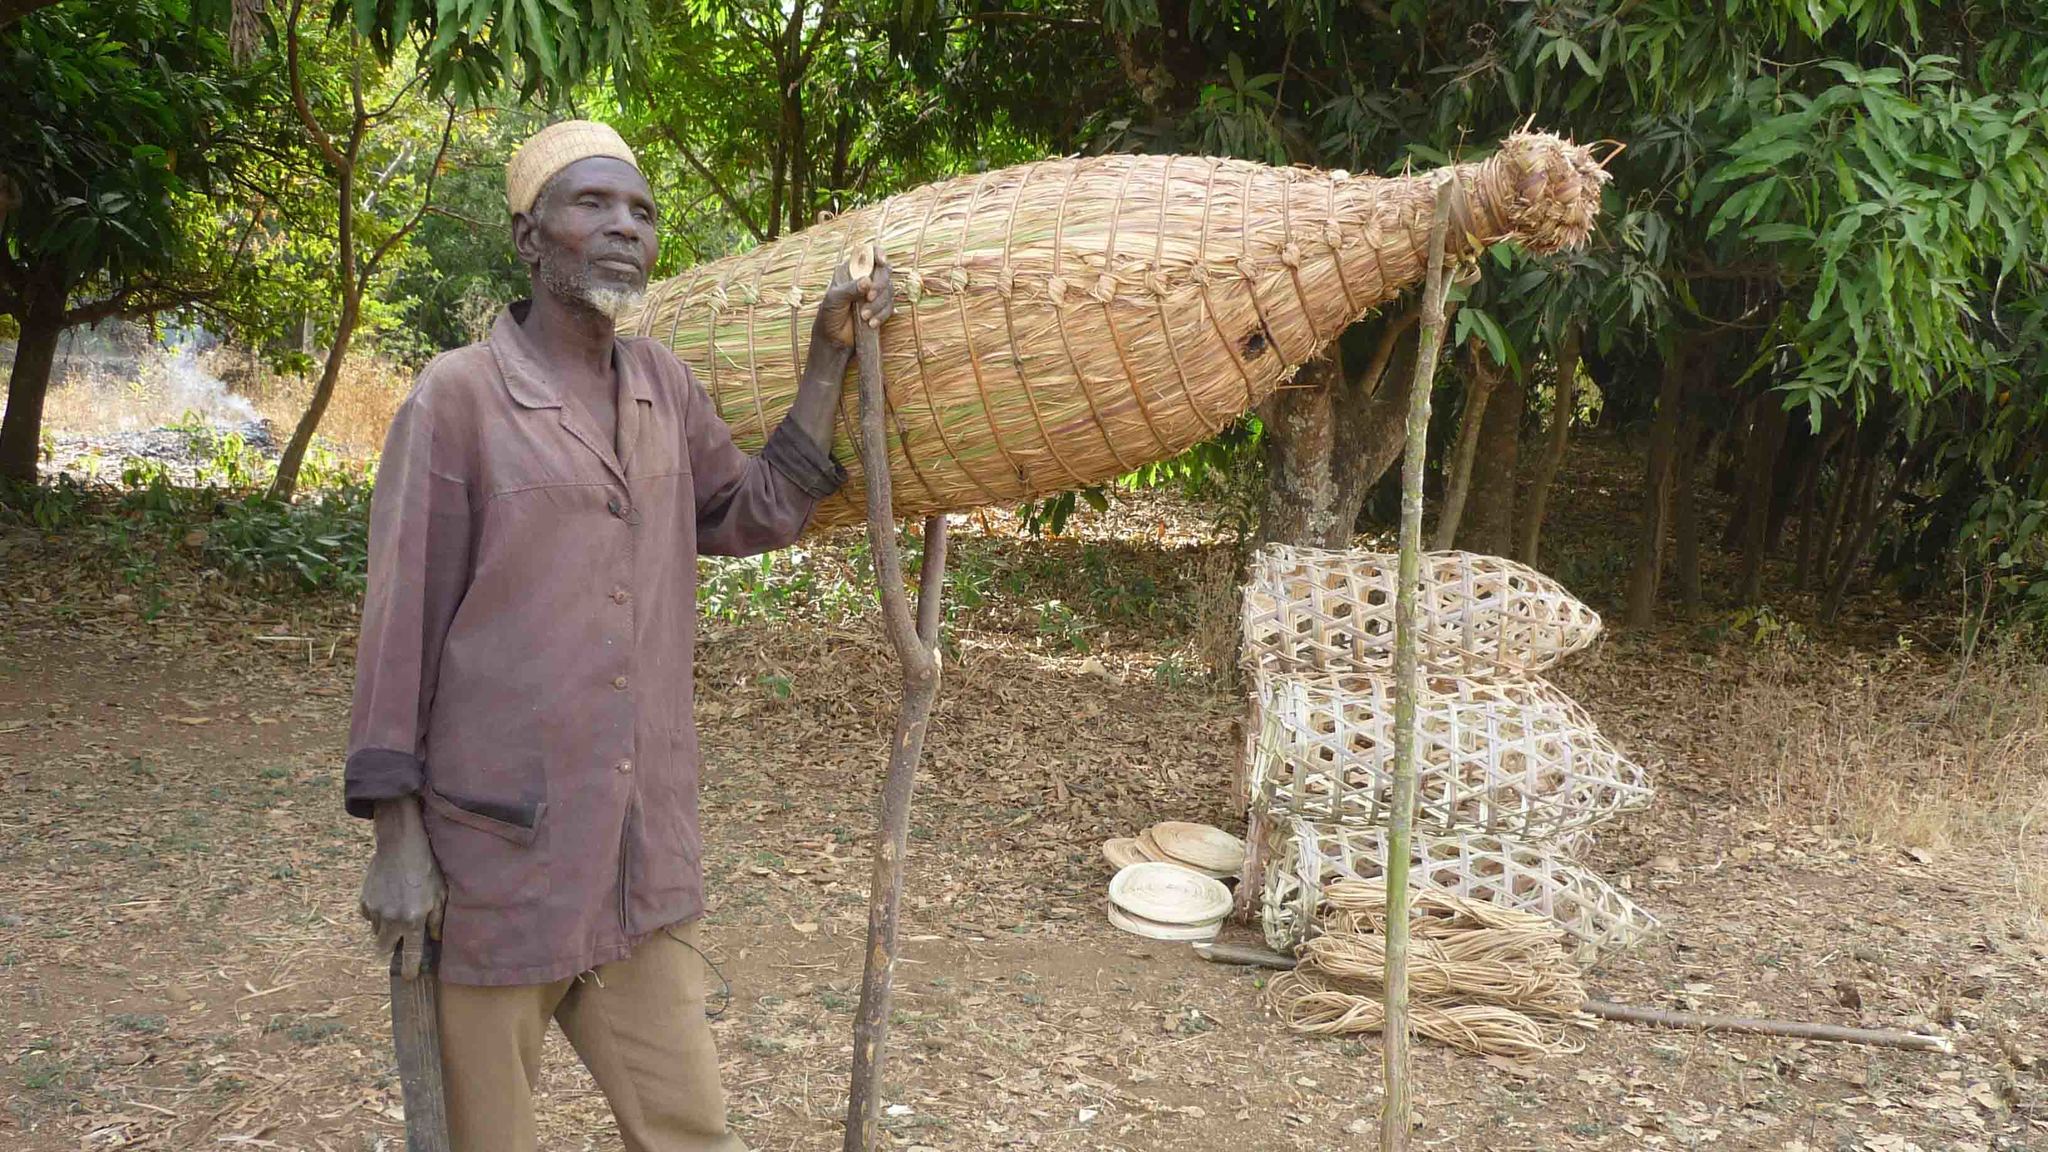 Beehives are artfully crafted by hand in Cameroon. The photo shows a Cameroonian beekeeper. It is the cover photo of the book by Martin Gruber and Mazi Sanda.